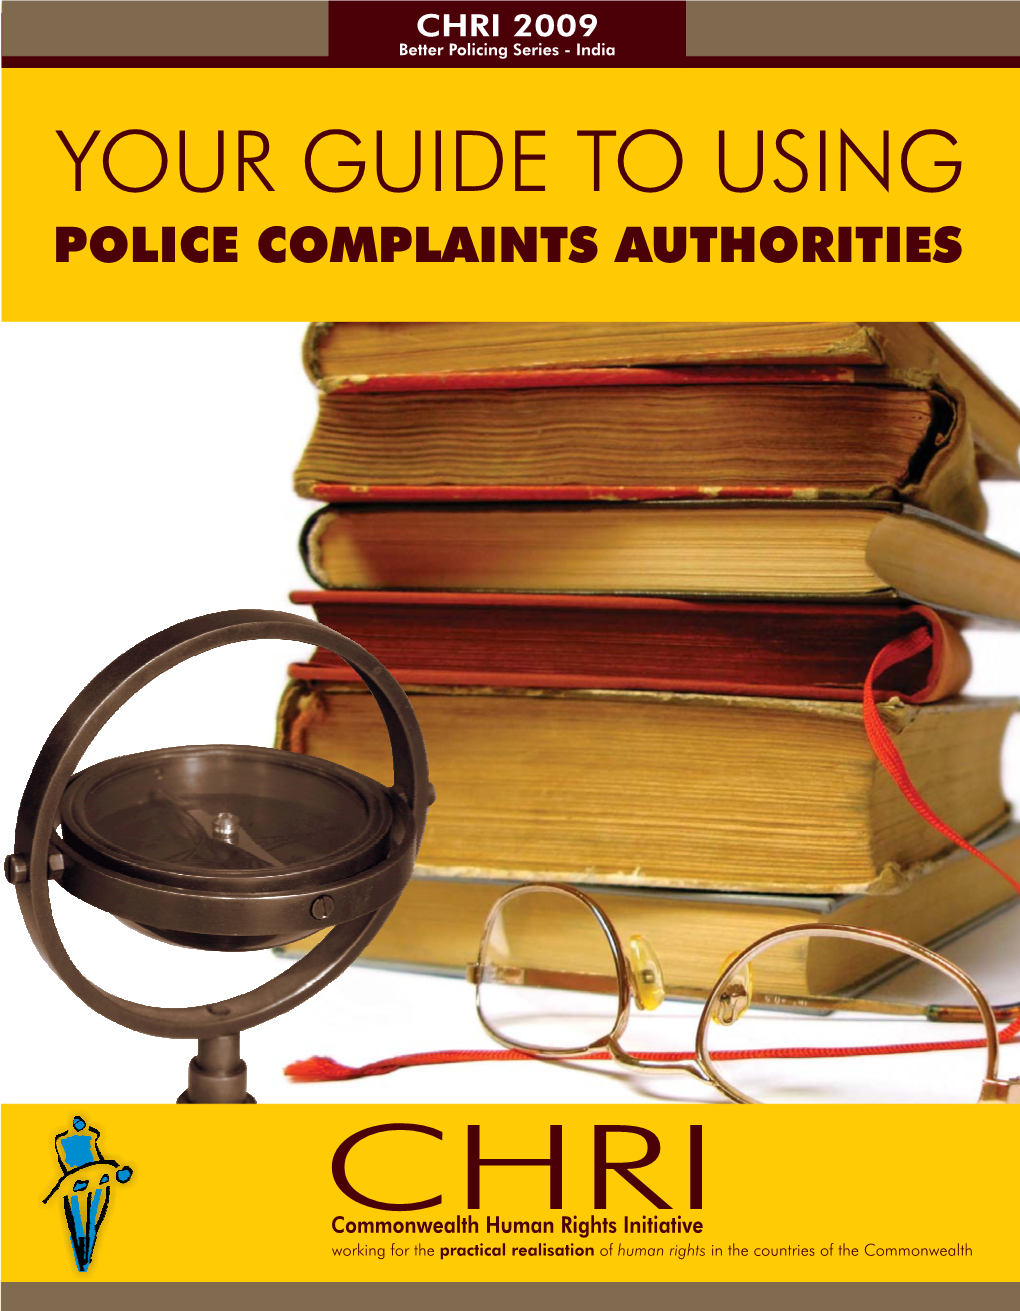 Your Guide to Using Police Complaints Authorities